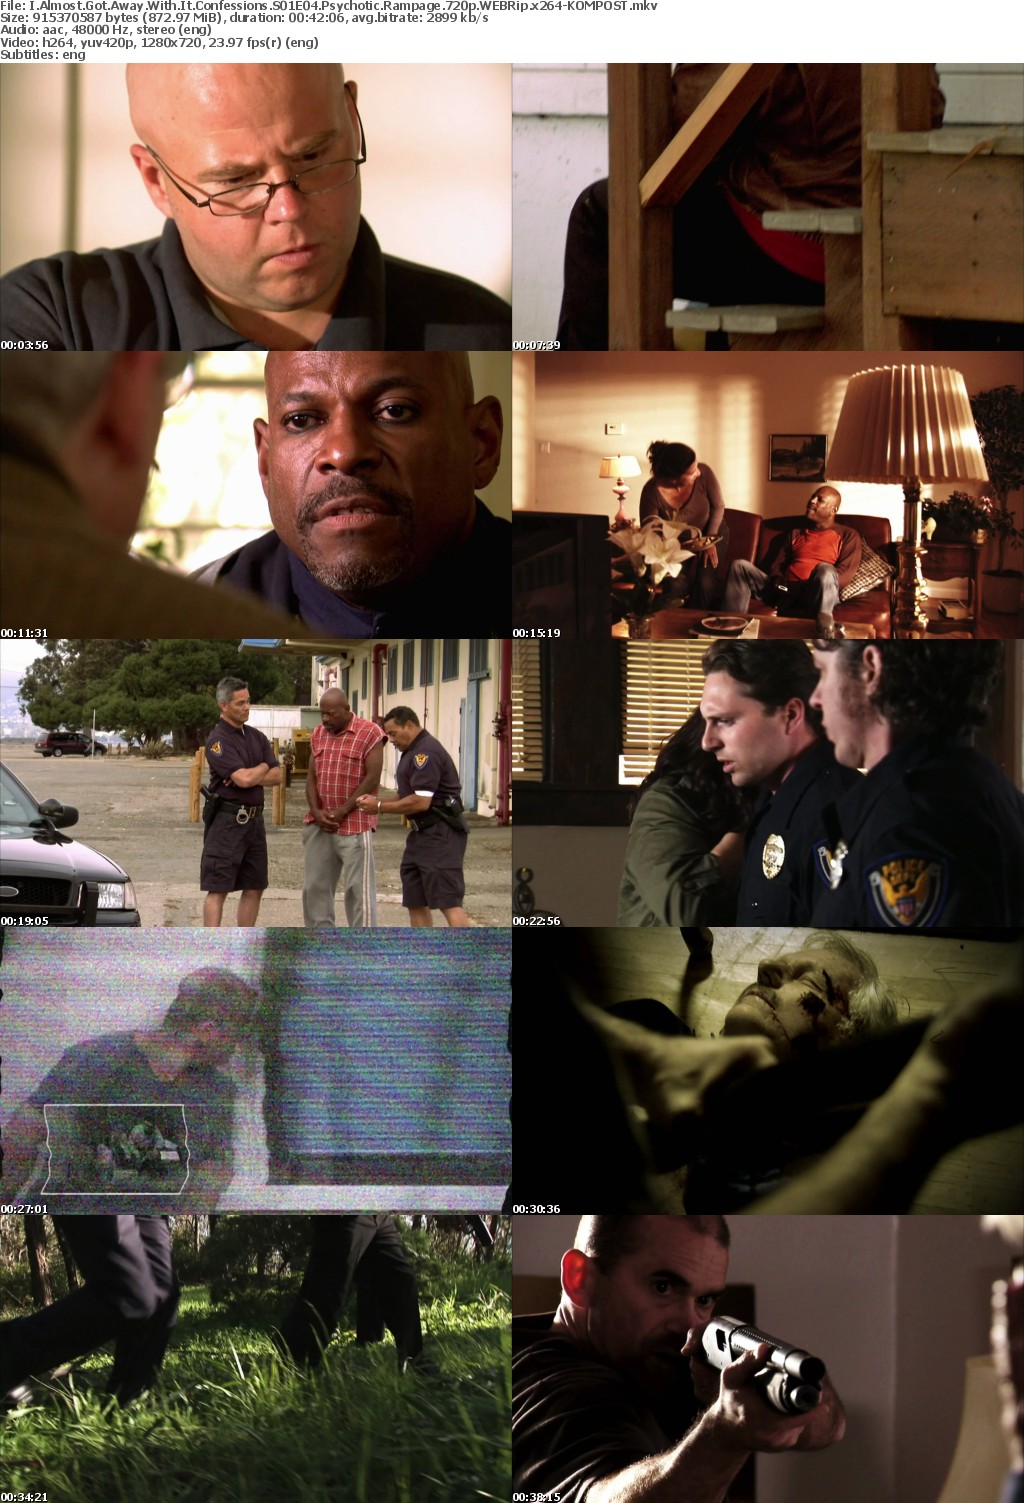 I Almost Got Away With It Confessions S01E04 Psychotic Rampage 720p WEBRip x264-KOMPOST